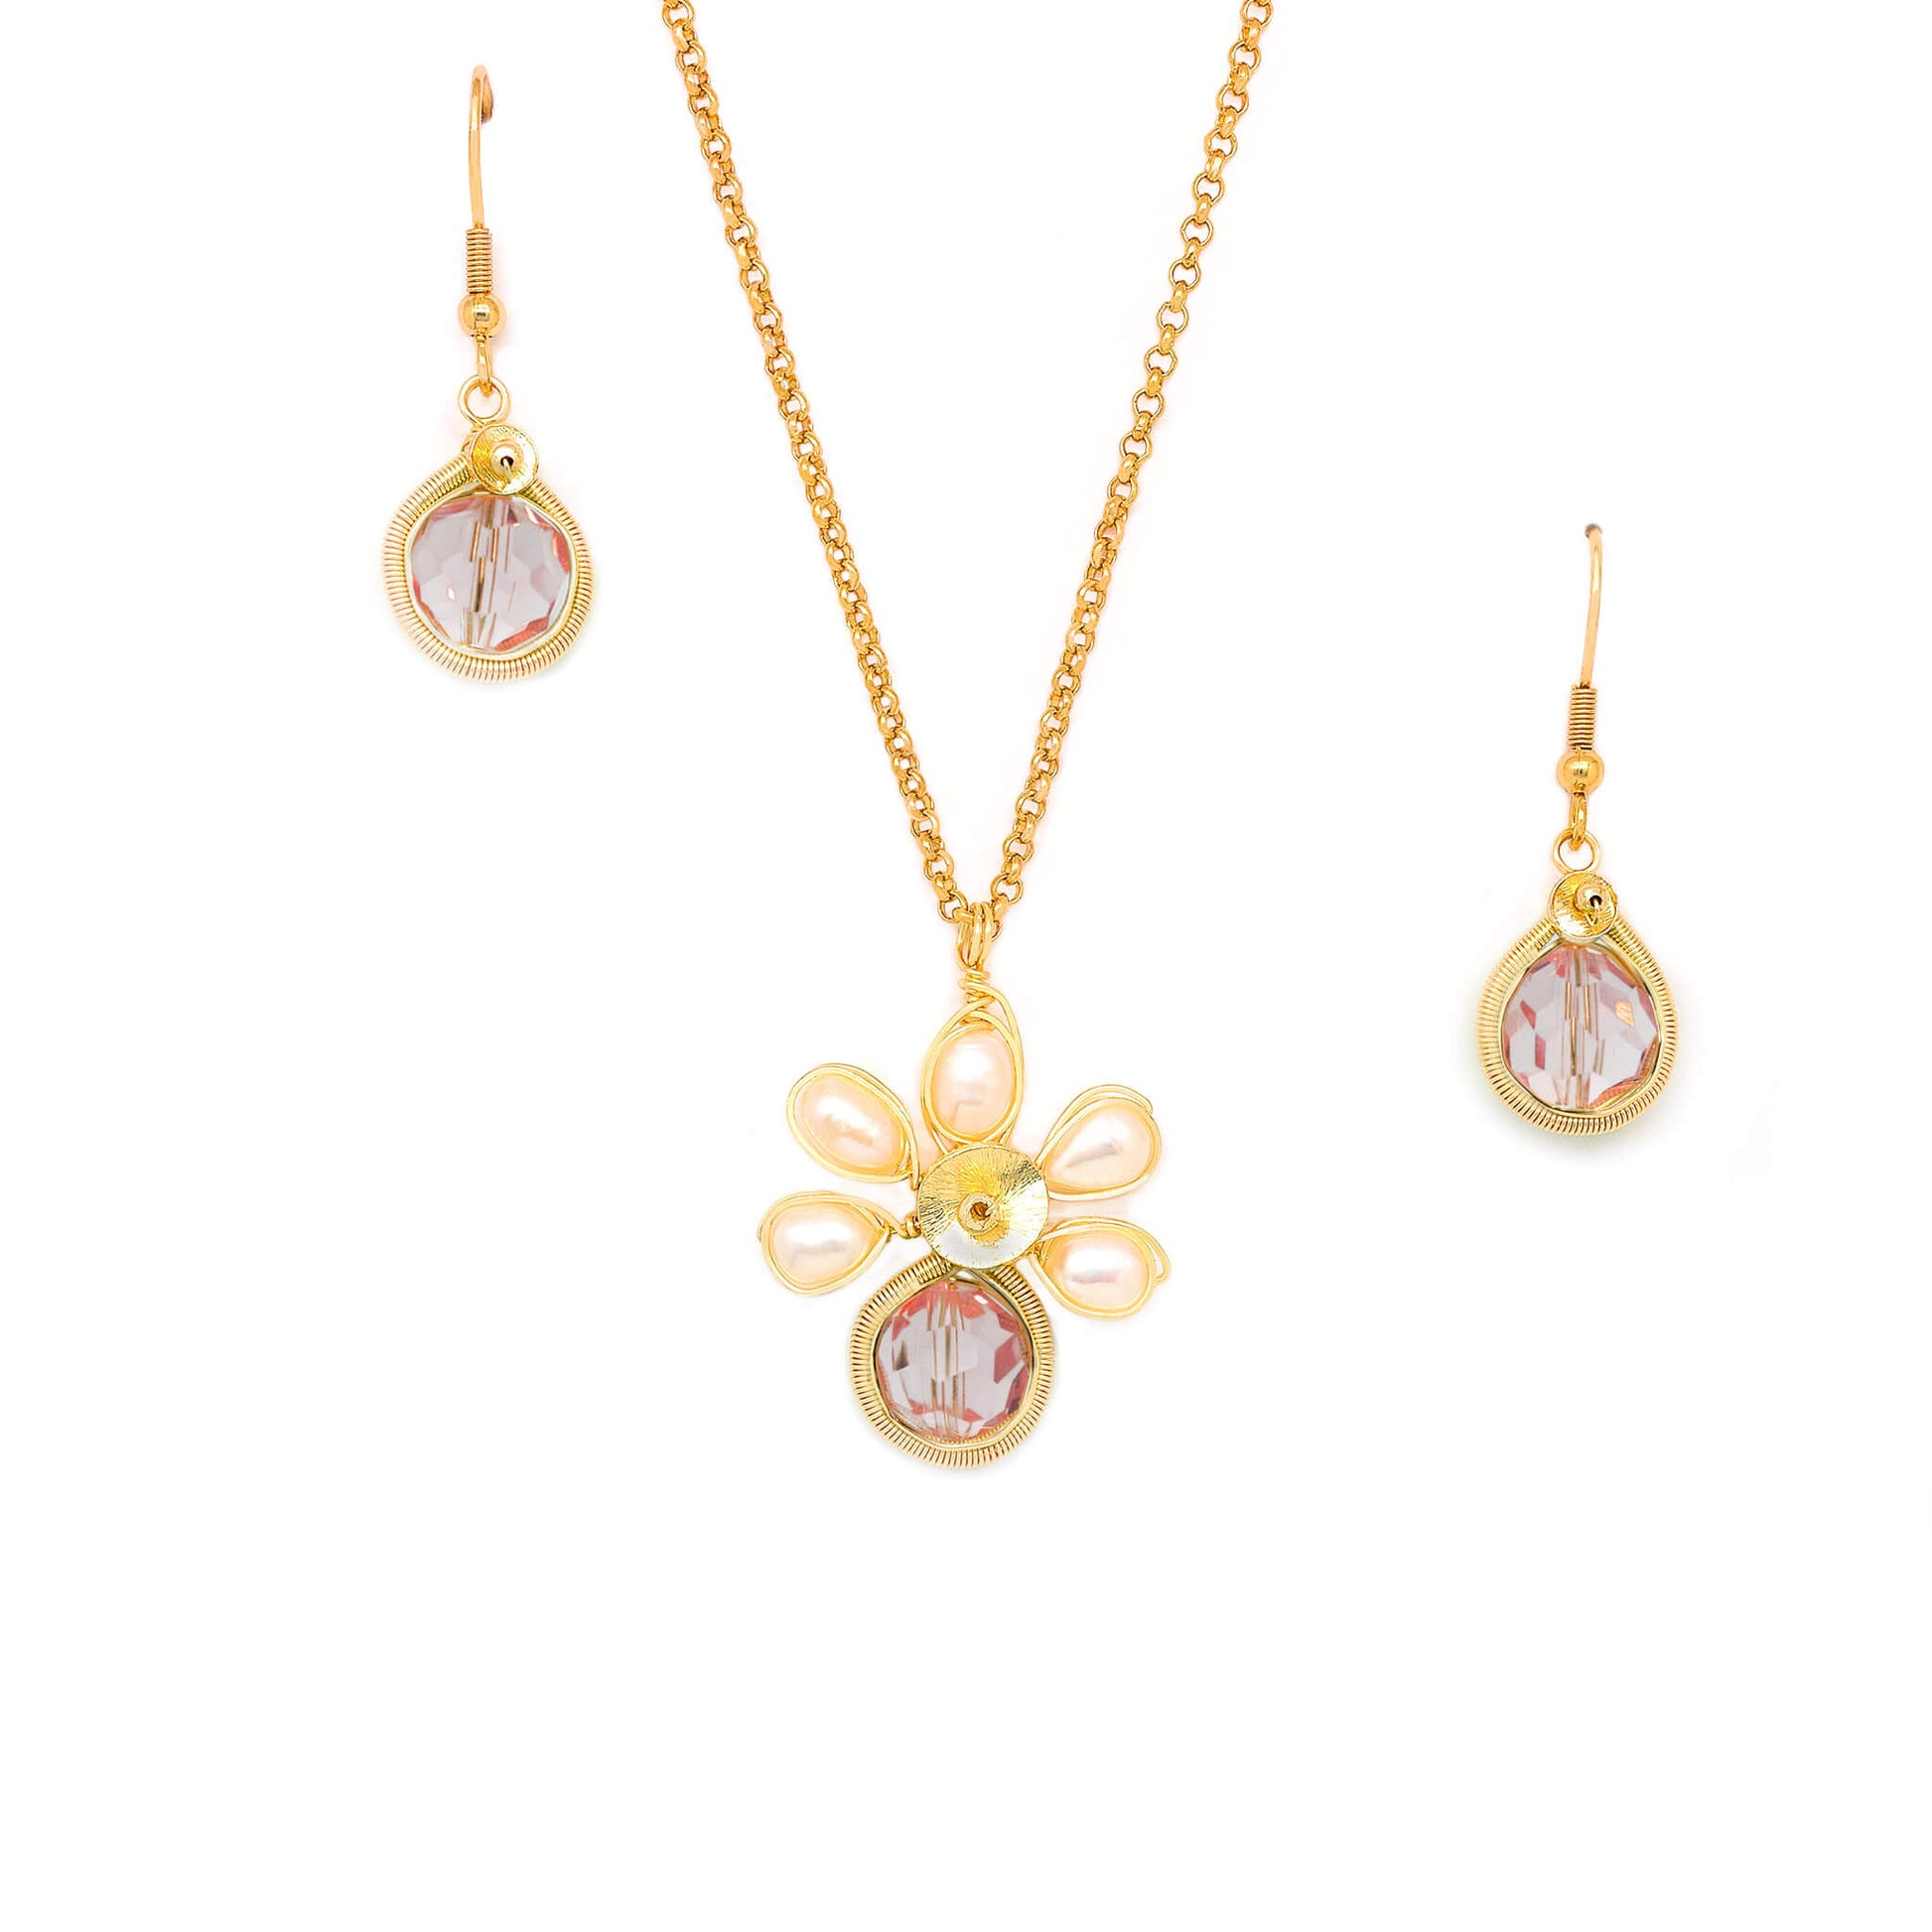 October Birthstone Crystal Necklace.-Earrings Set. Pink Crystals, Fresh Water Pearls  and Gold Set. 22K Gold Plated Chain. 